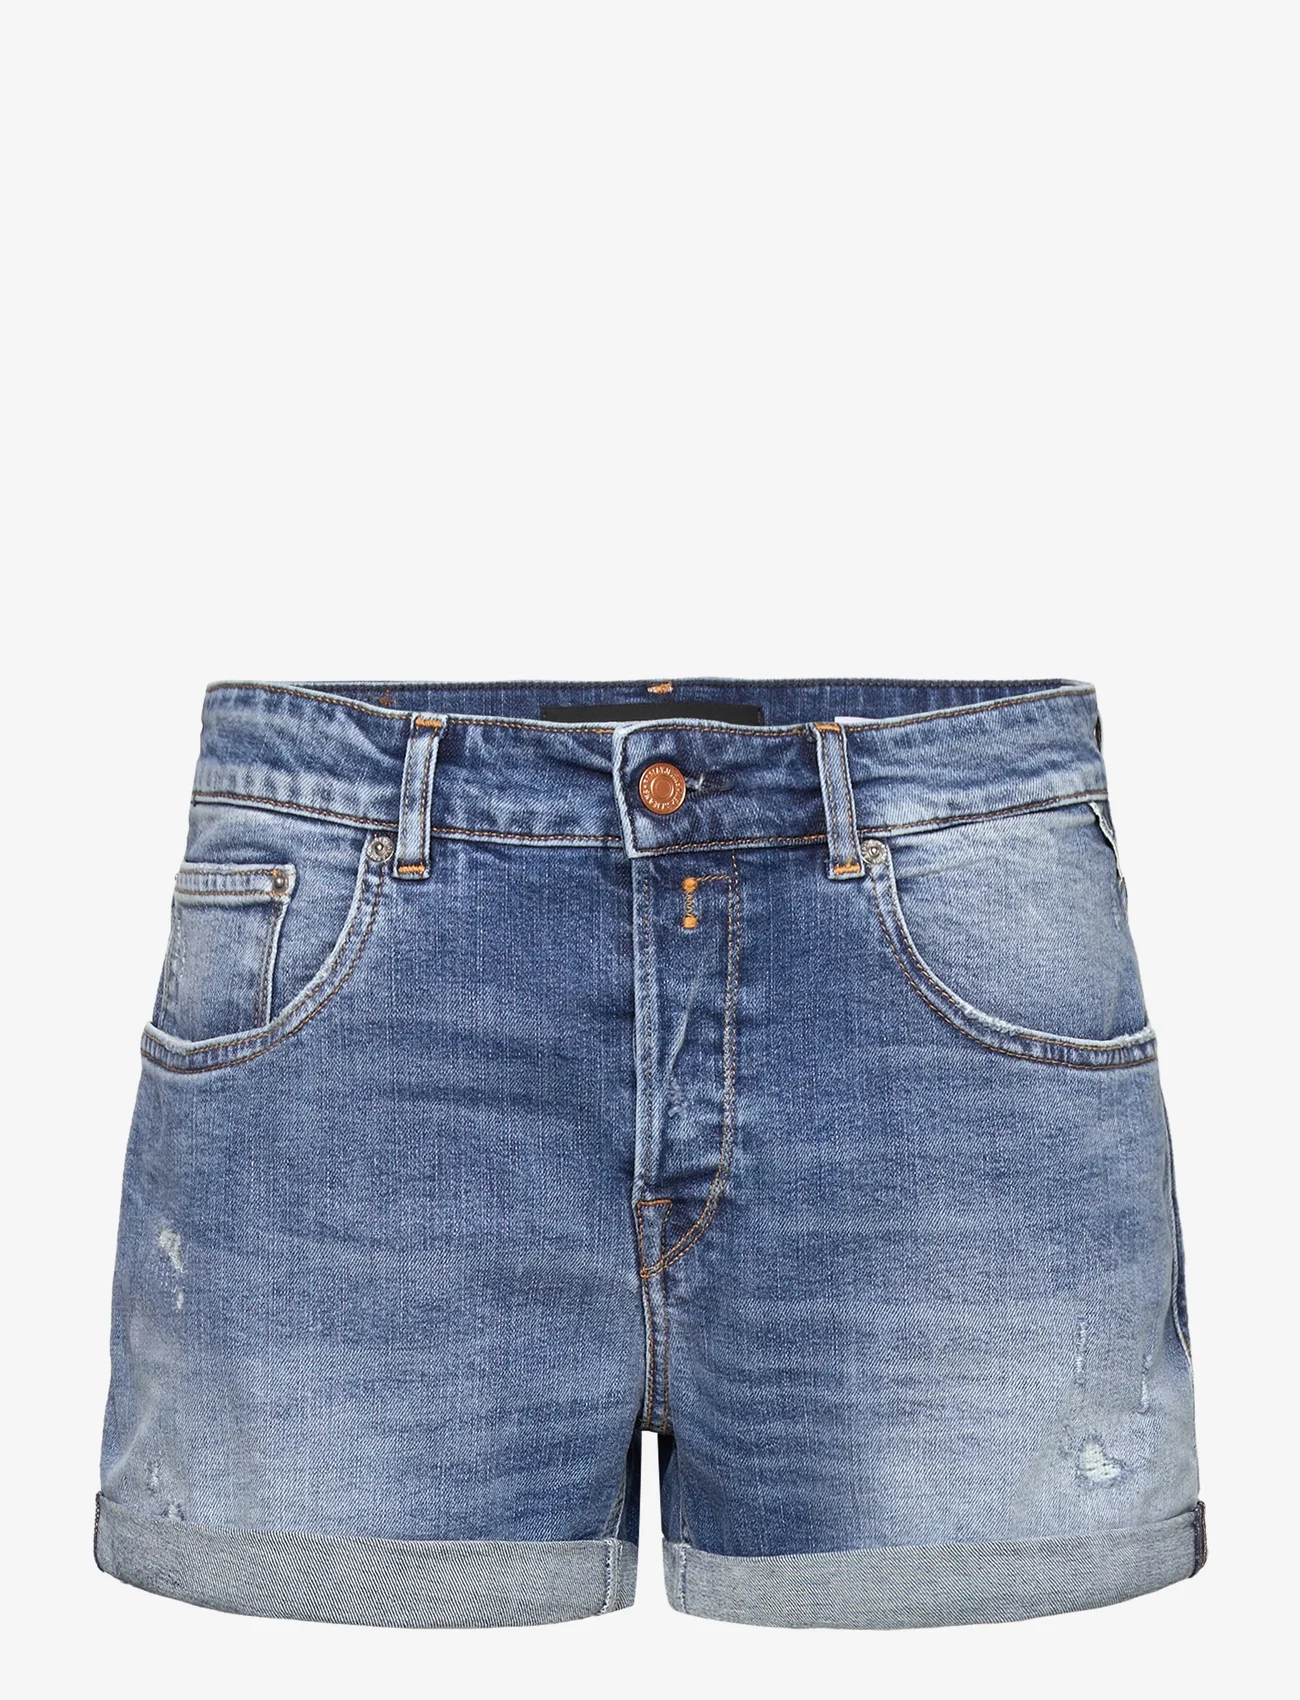 Replay - ANYTA Shorts  573 - jeansshorts - blue - 0